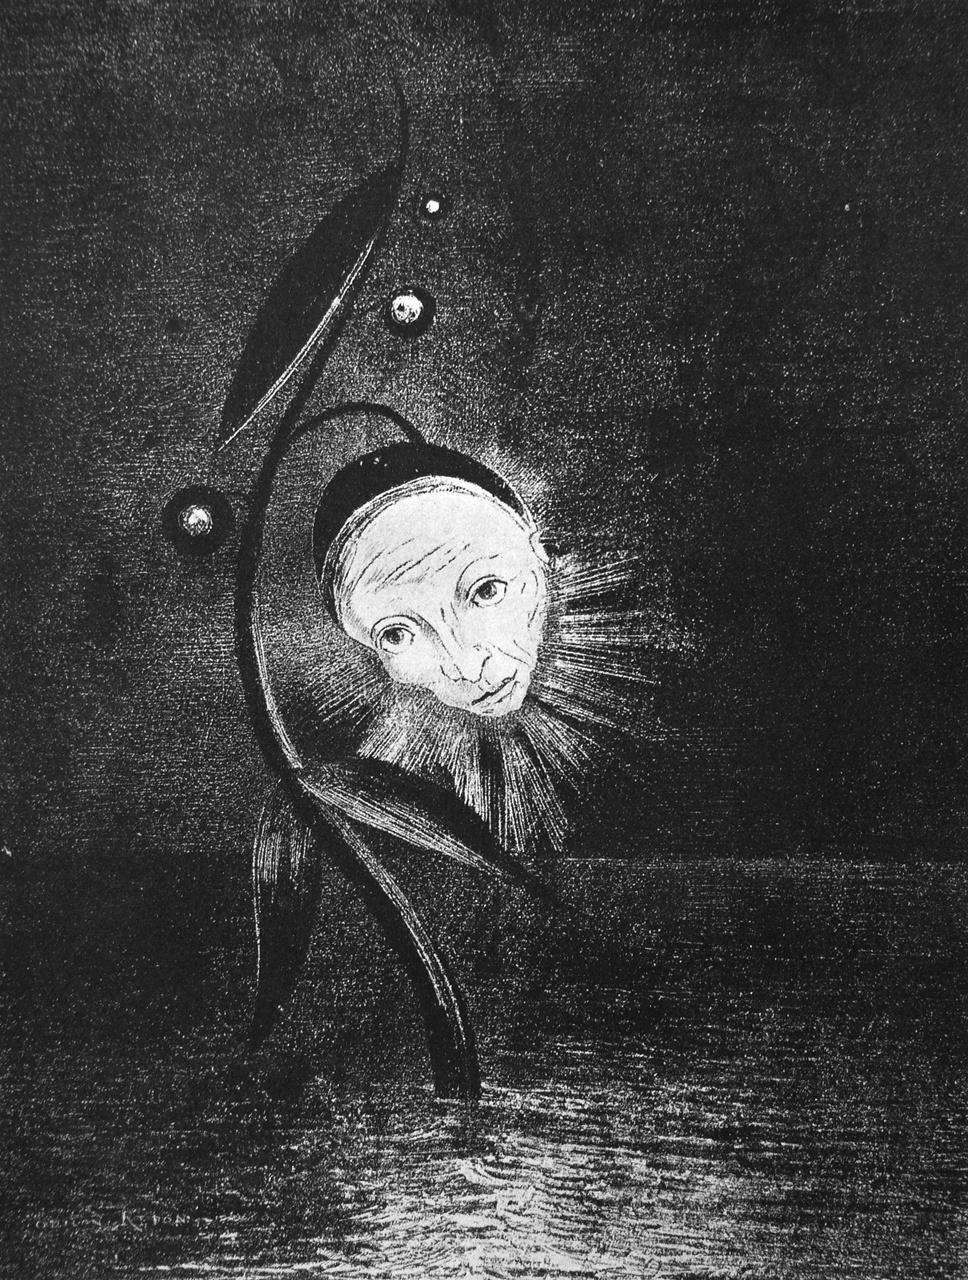 The Marsh Flower, A Sad Human Head (1885) by Odilon Redon. As reproduced in Art in Time